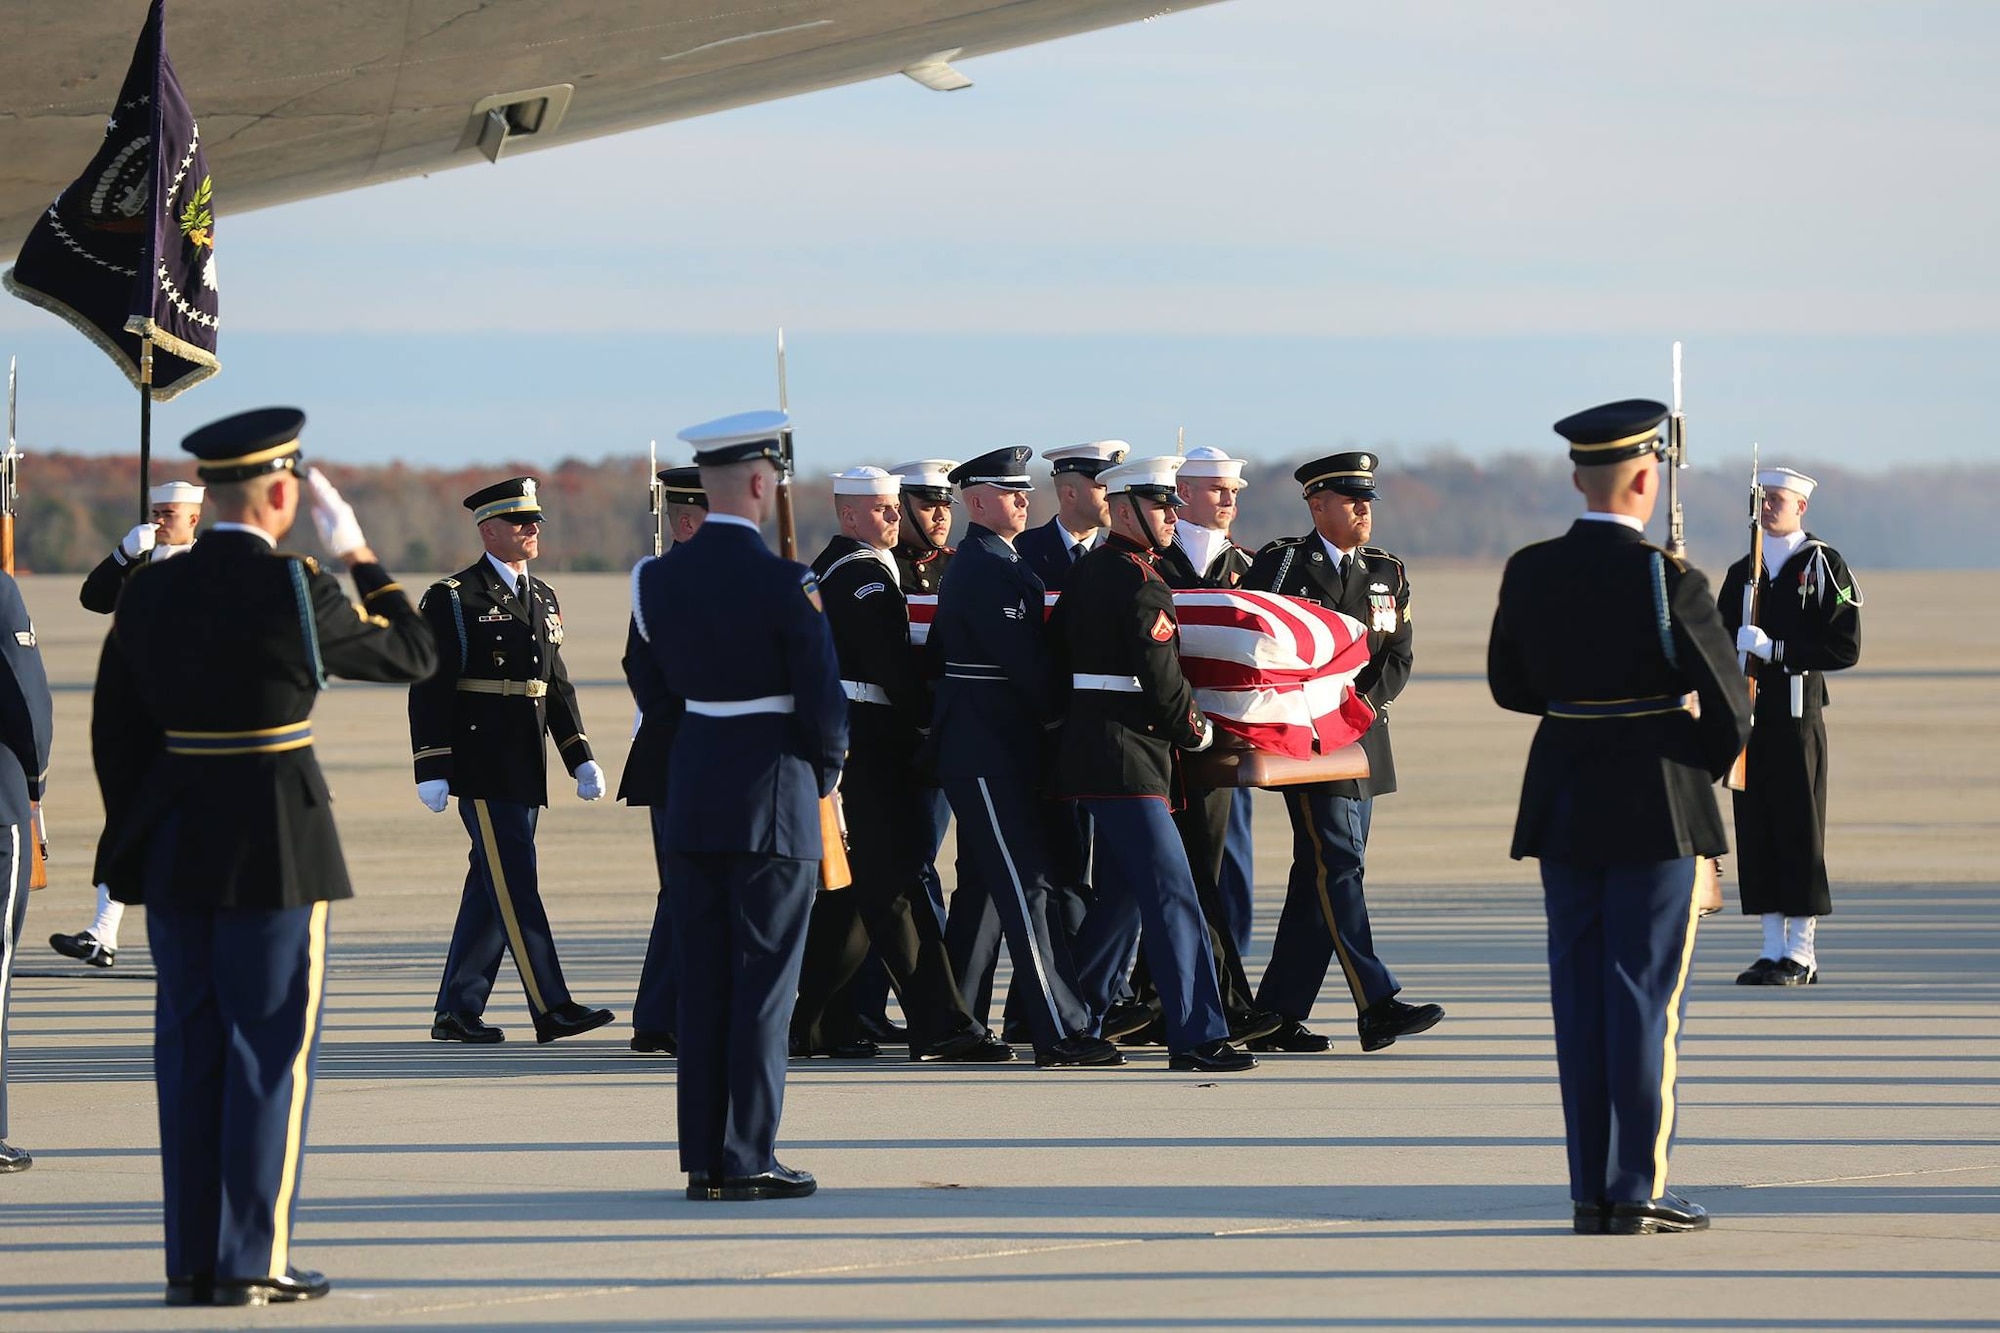 U.S. service members prepare to place the casket of George H.W. Bush, 41st President of the United States, into a hearse, Joint Base Andrews, Maryland, Dec. 03, 2018.